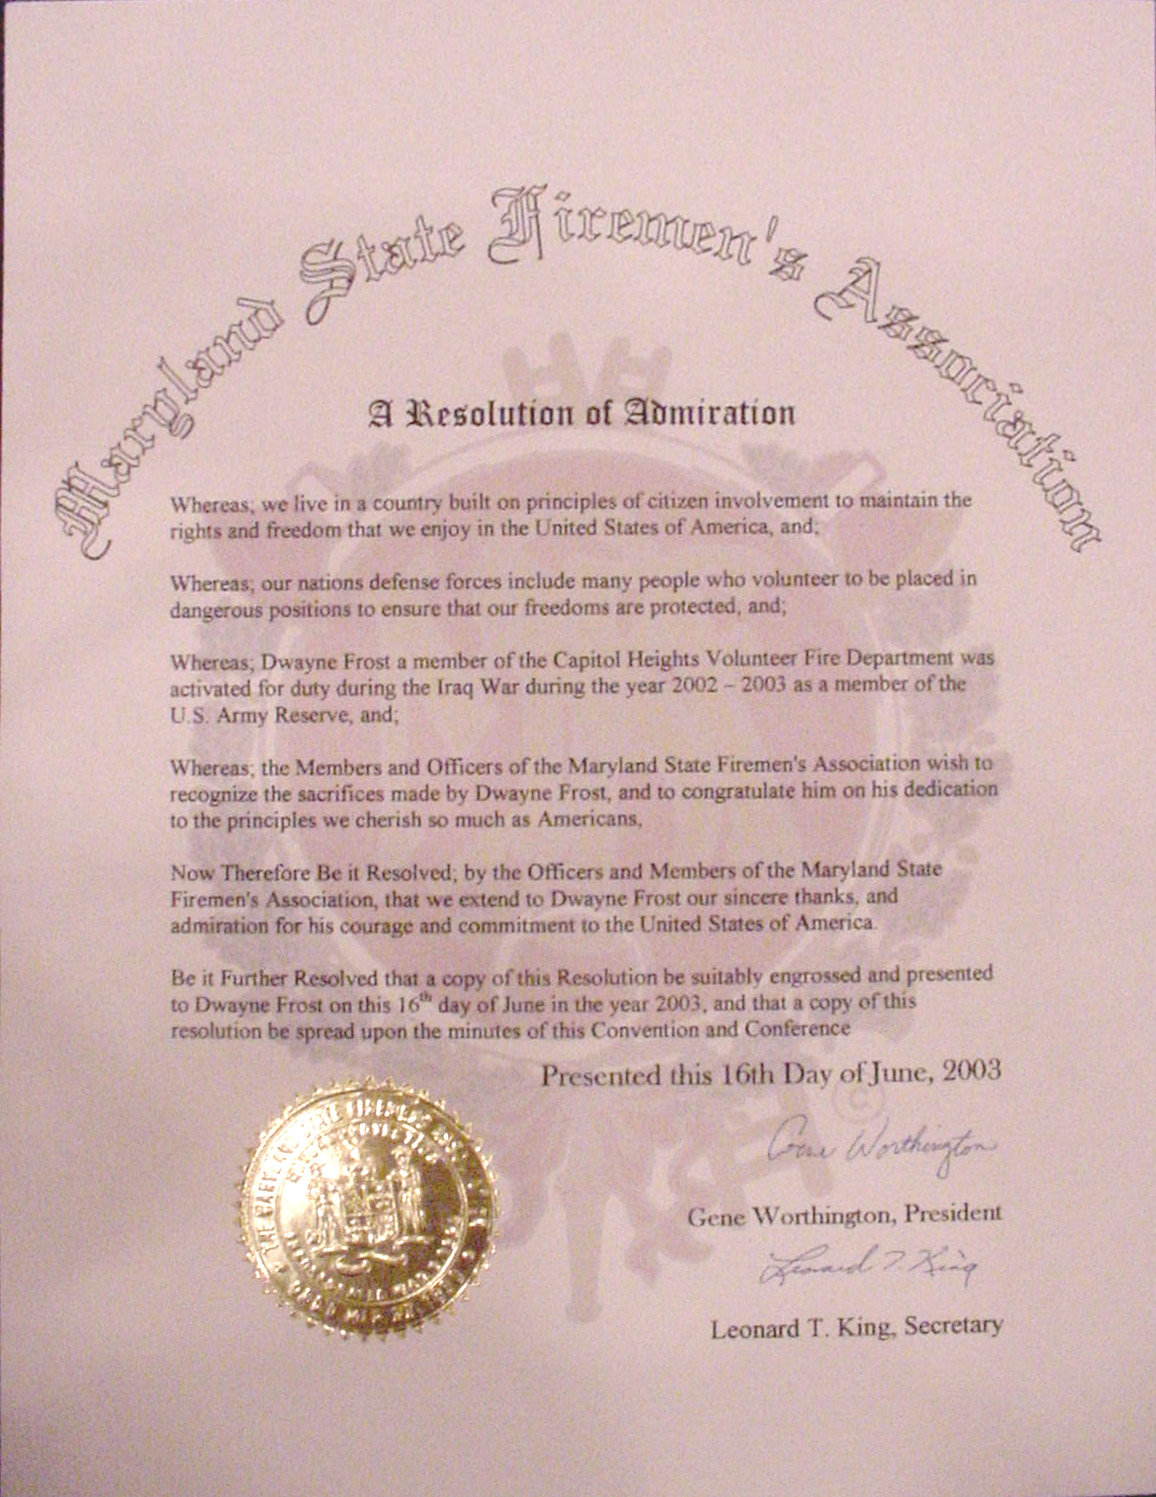 MSFA Convention 2003 - Certificate of Recognition for Dwayne Frost